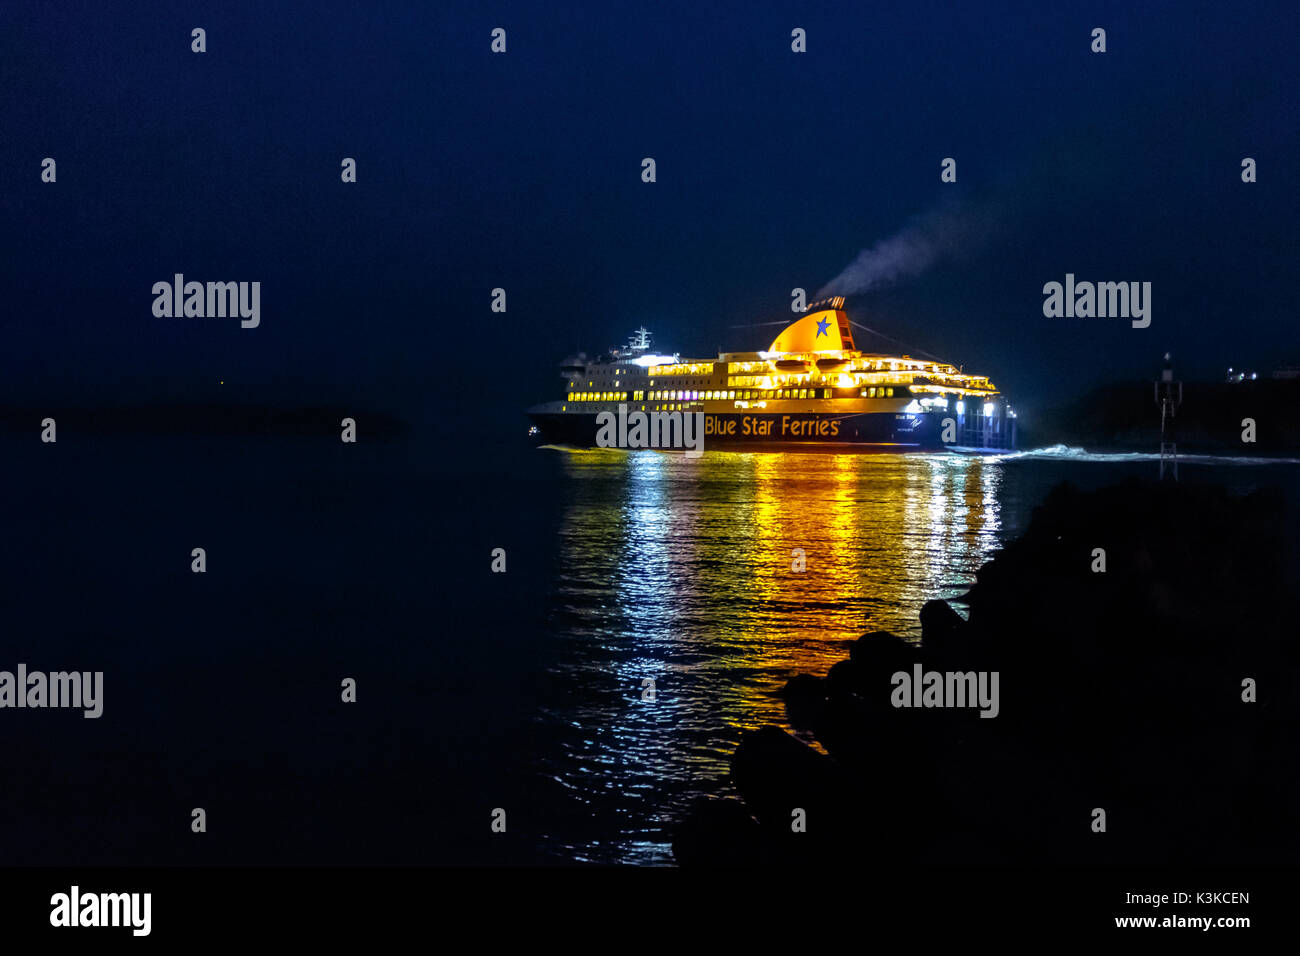 Blue Star Patmos ferry boat in one of its last journeys before hitting shallow ground and become immobilized near Ios, Greece at 30th August 2017. Stock Photo